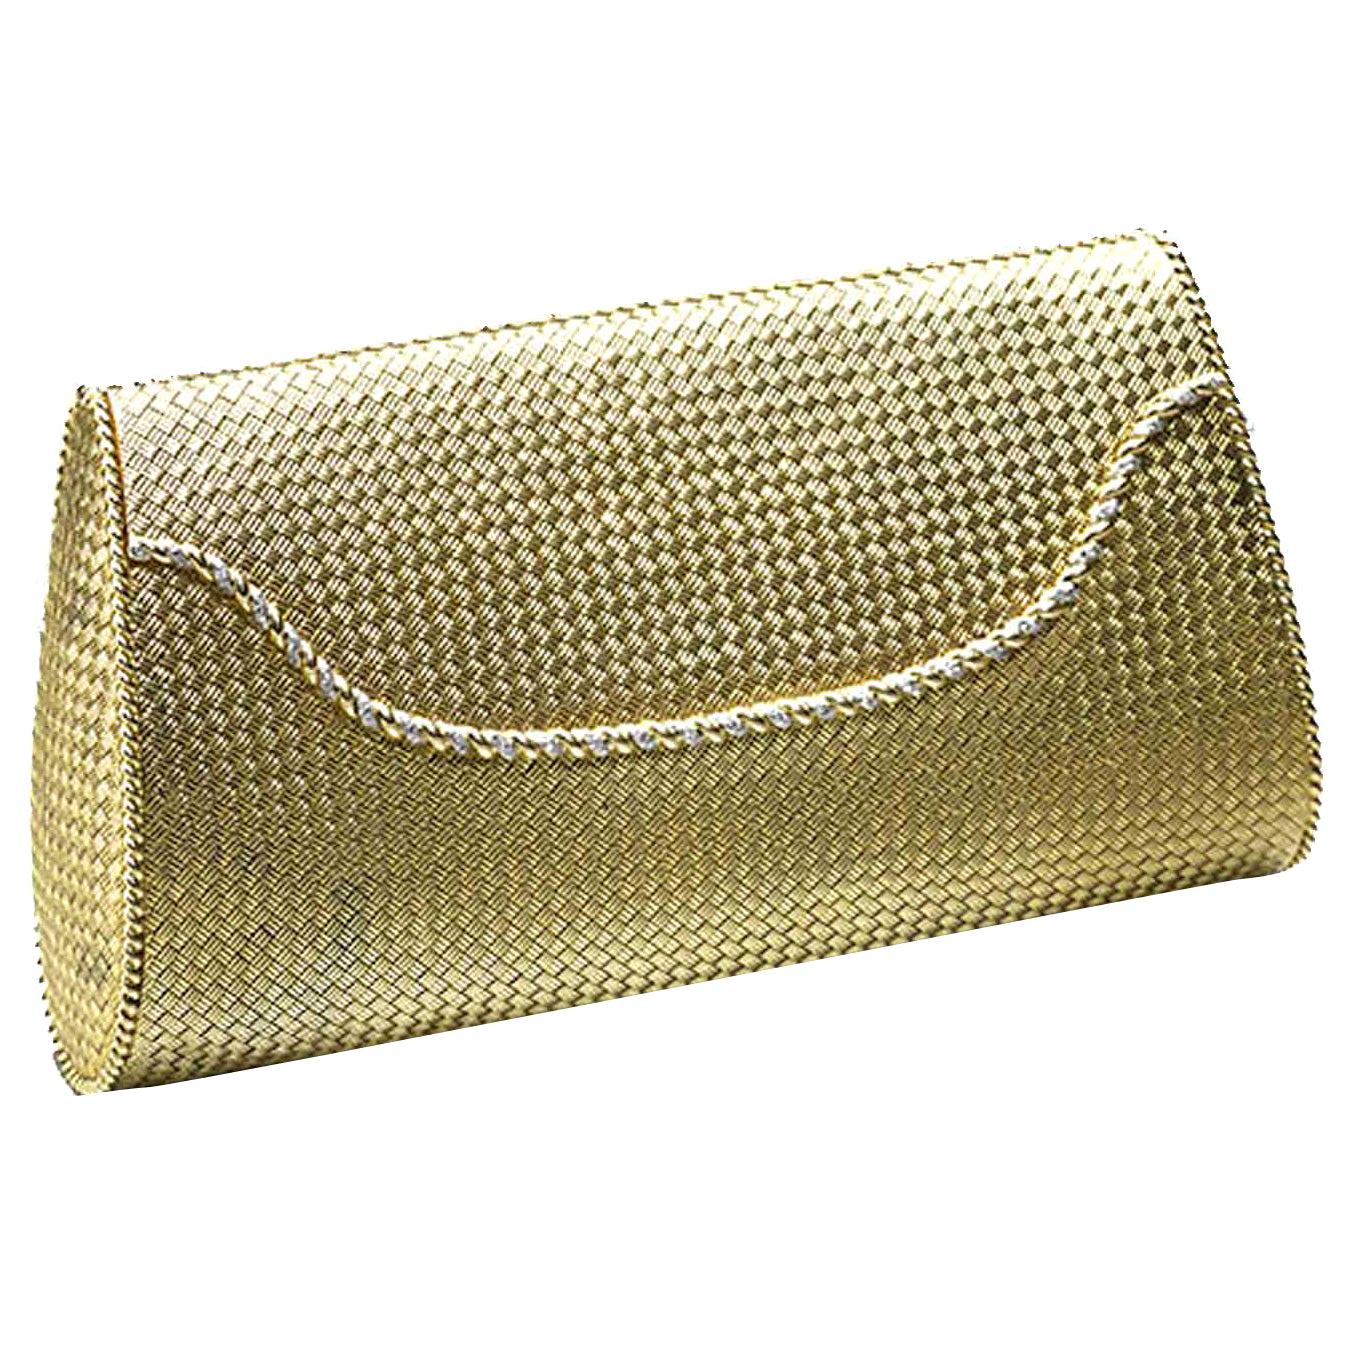 Tiffany & Co. Woven Gold Evening Bag